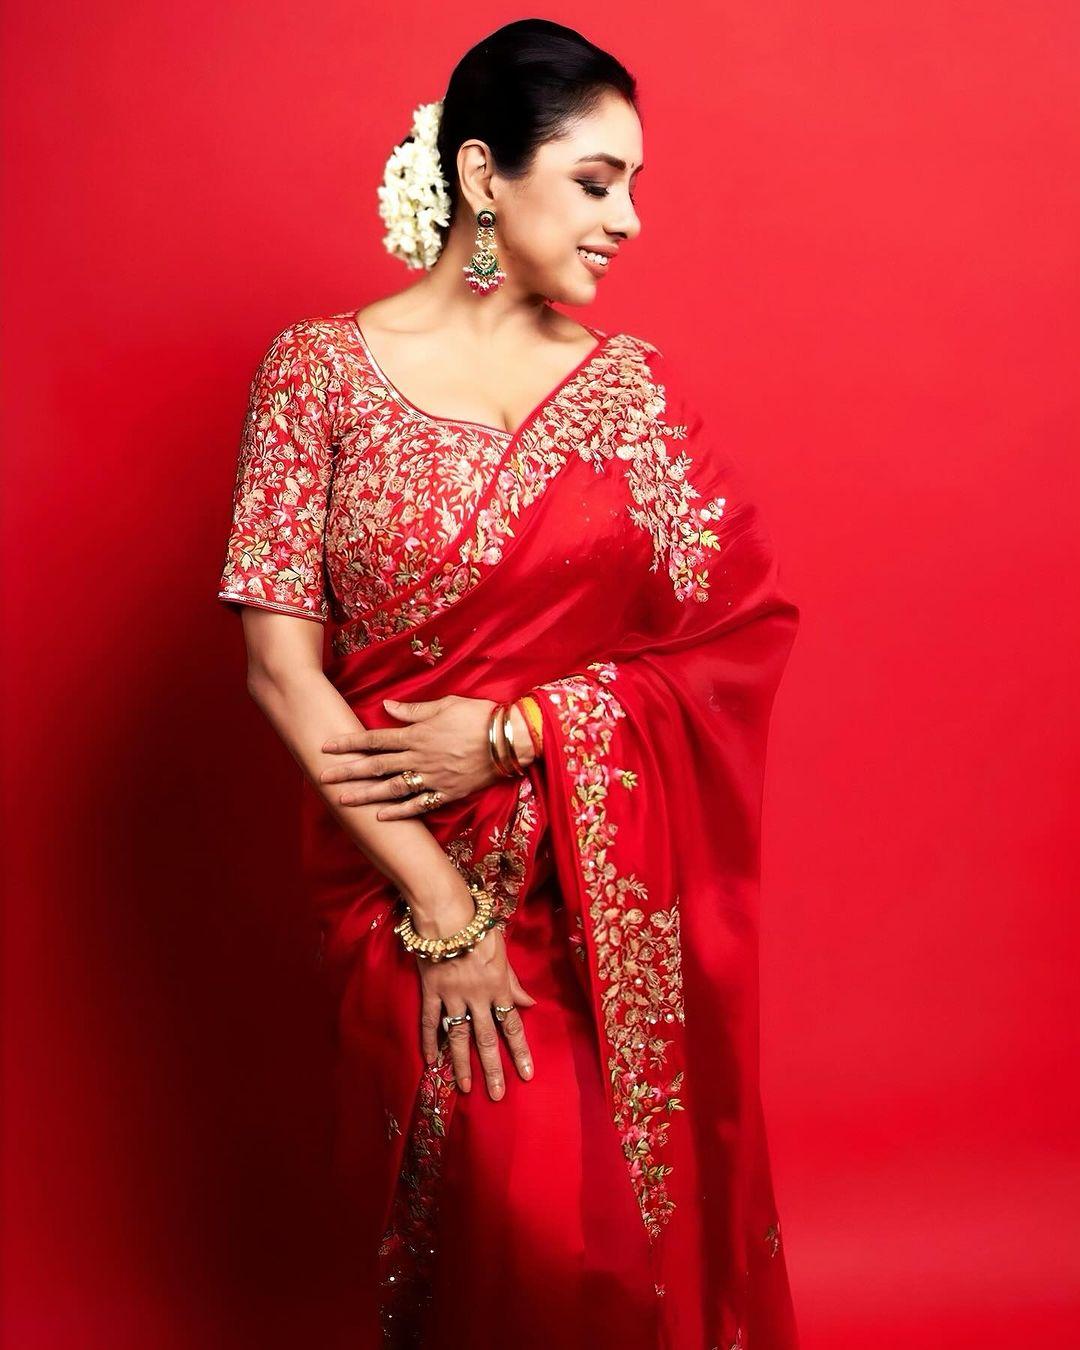 In this look, the actress wore a shiny striking red saree paired with a heavily embroidered blouse